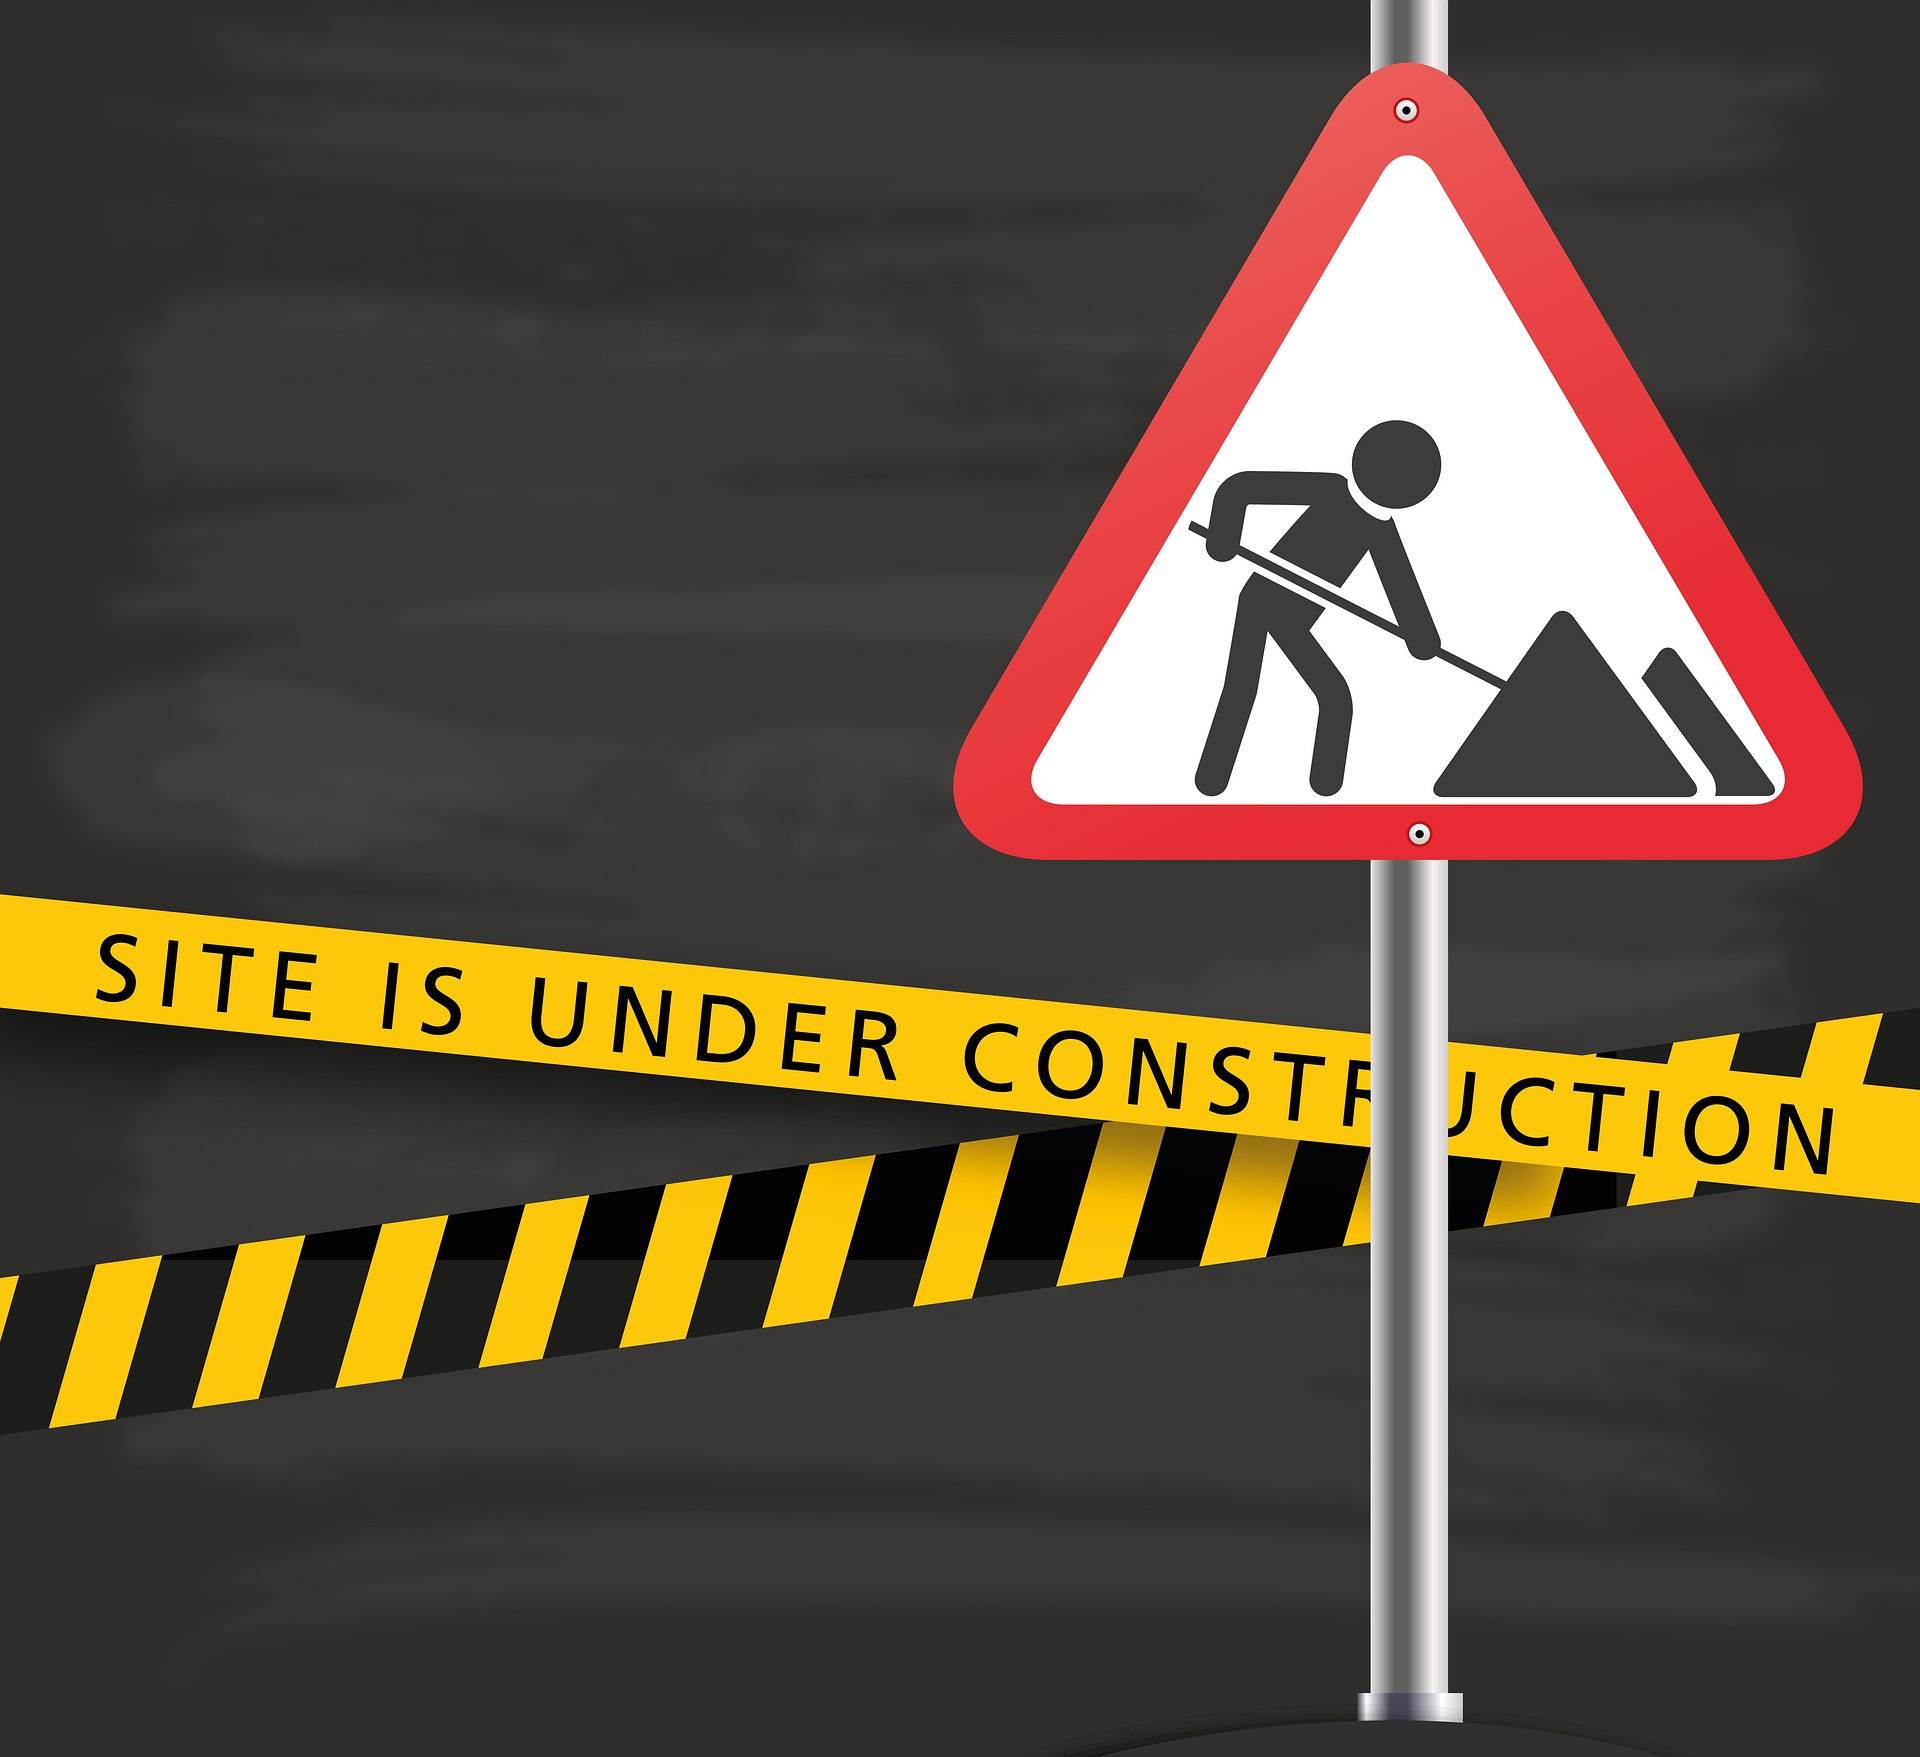 Image stating "site is under construction"